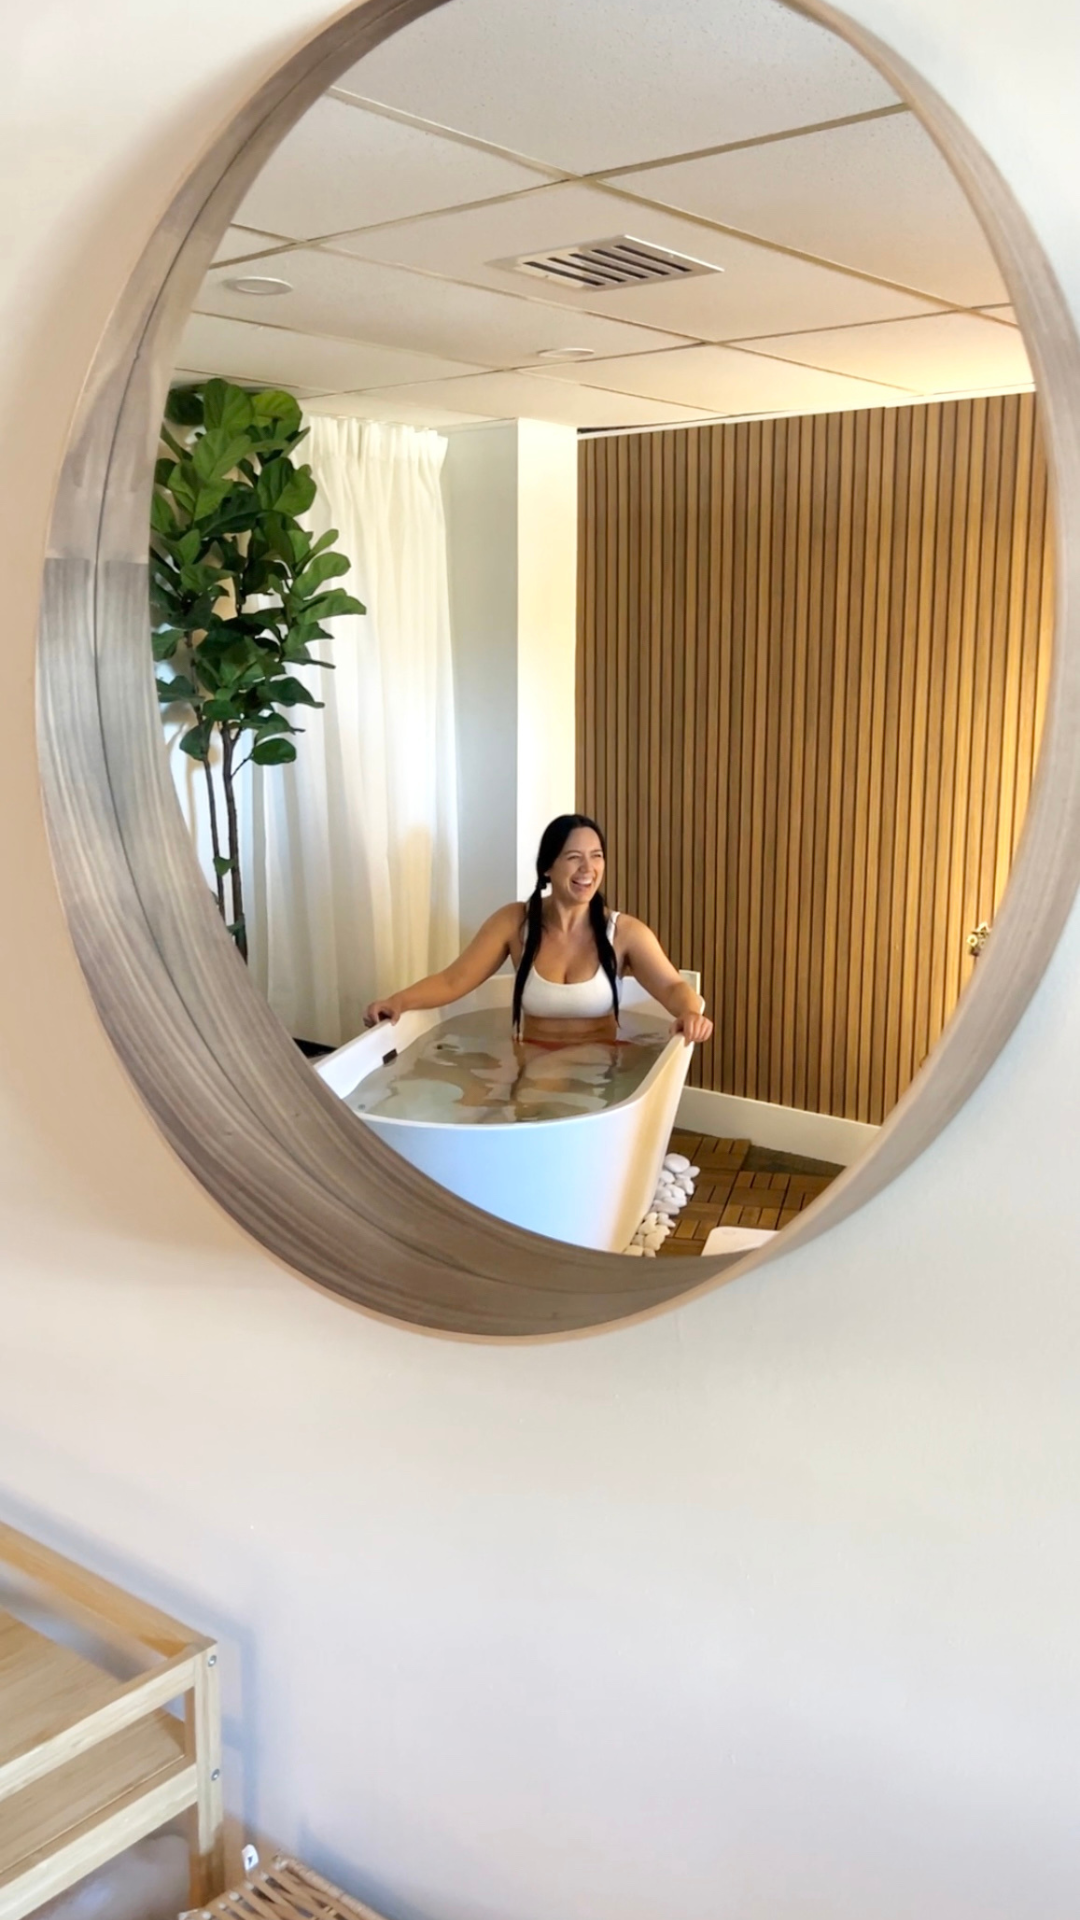 Coral Gables Yoga Studio Offers Cold Plunge and Infra Red Sauna along with other services